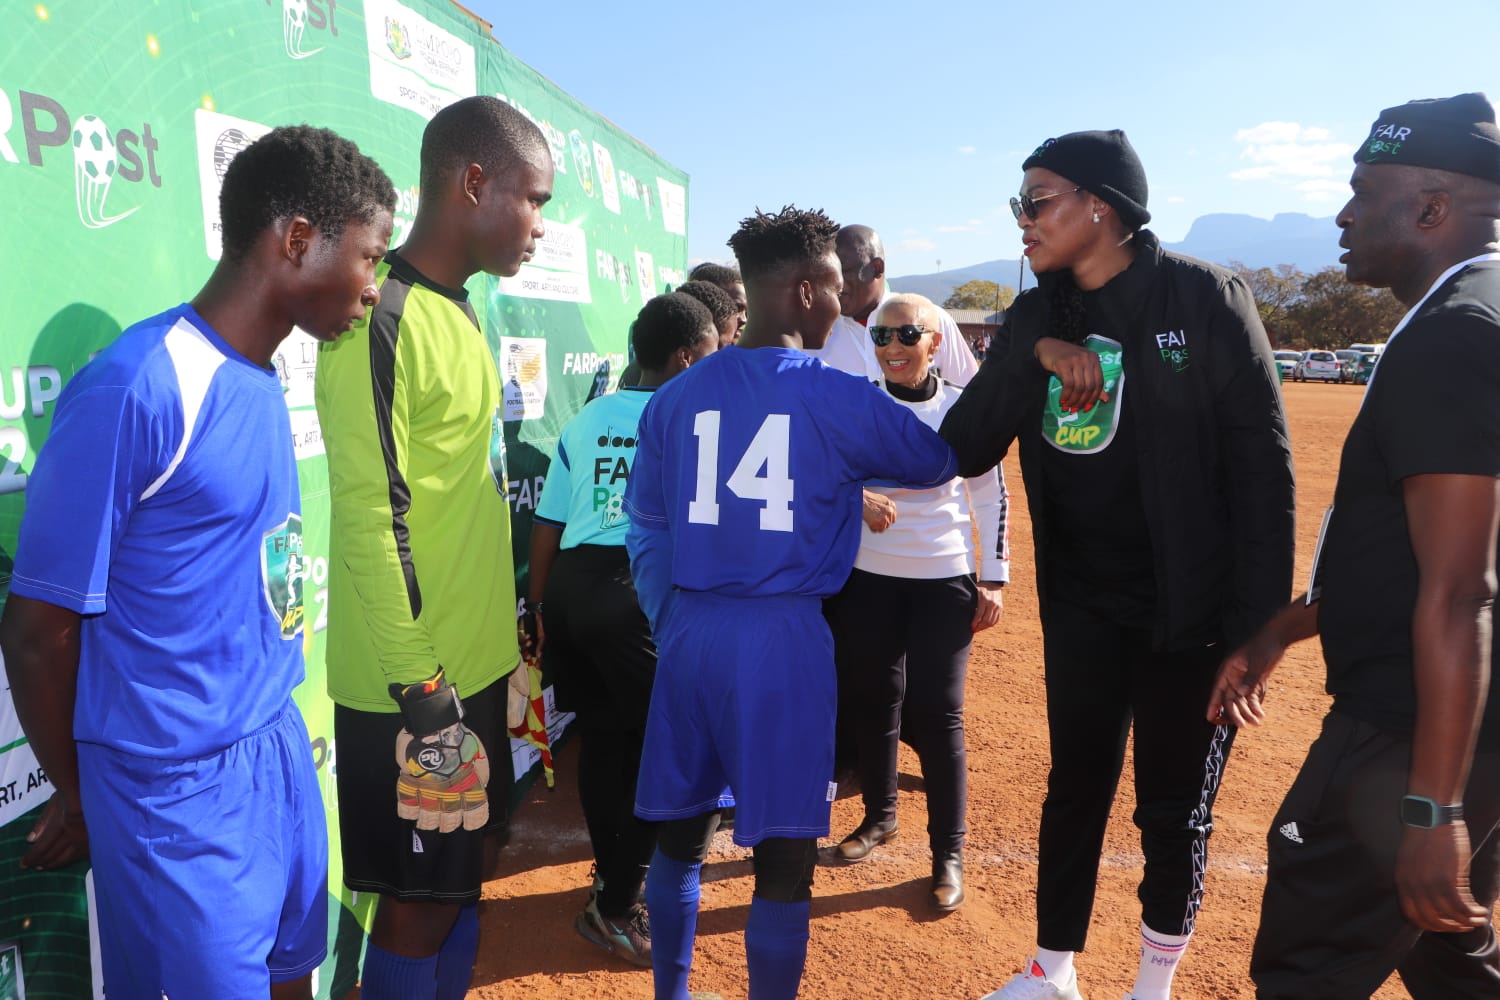 'An Inaugural Football Tournament for boys under 10 was held at Indermark Village in the Blouberg Municipality with the aim of unearthing raw talent.